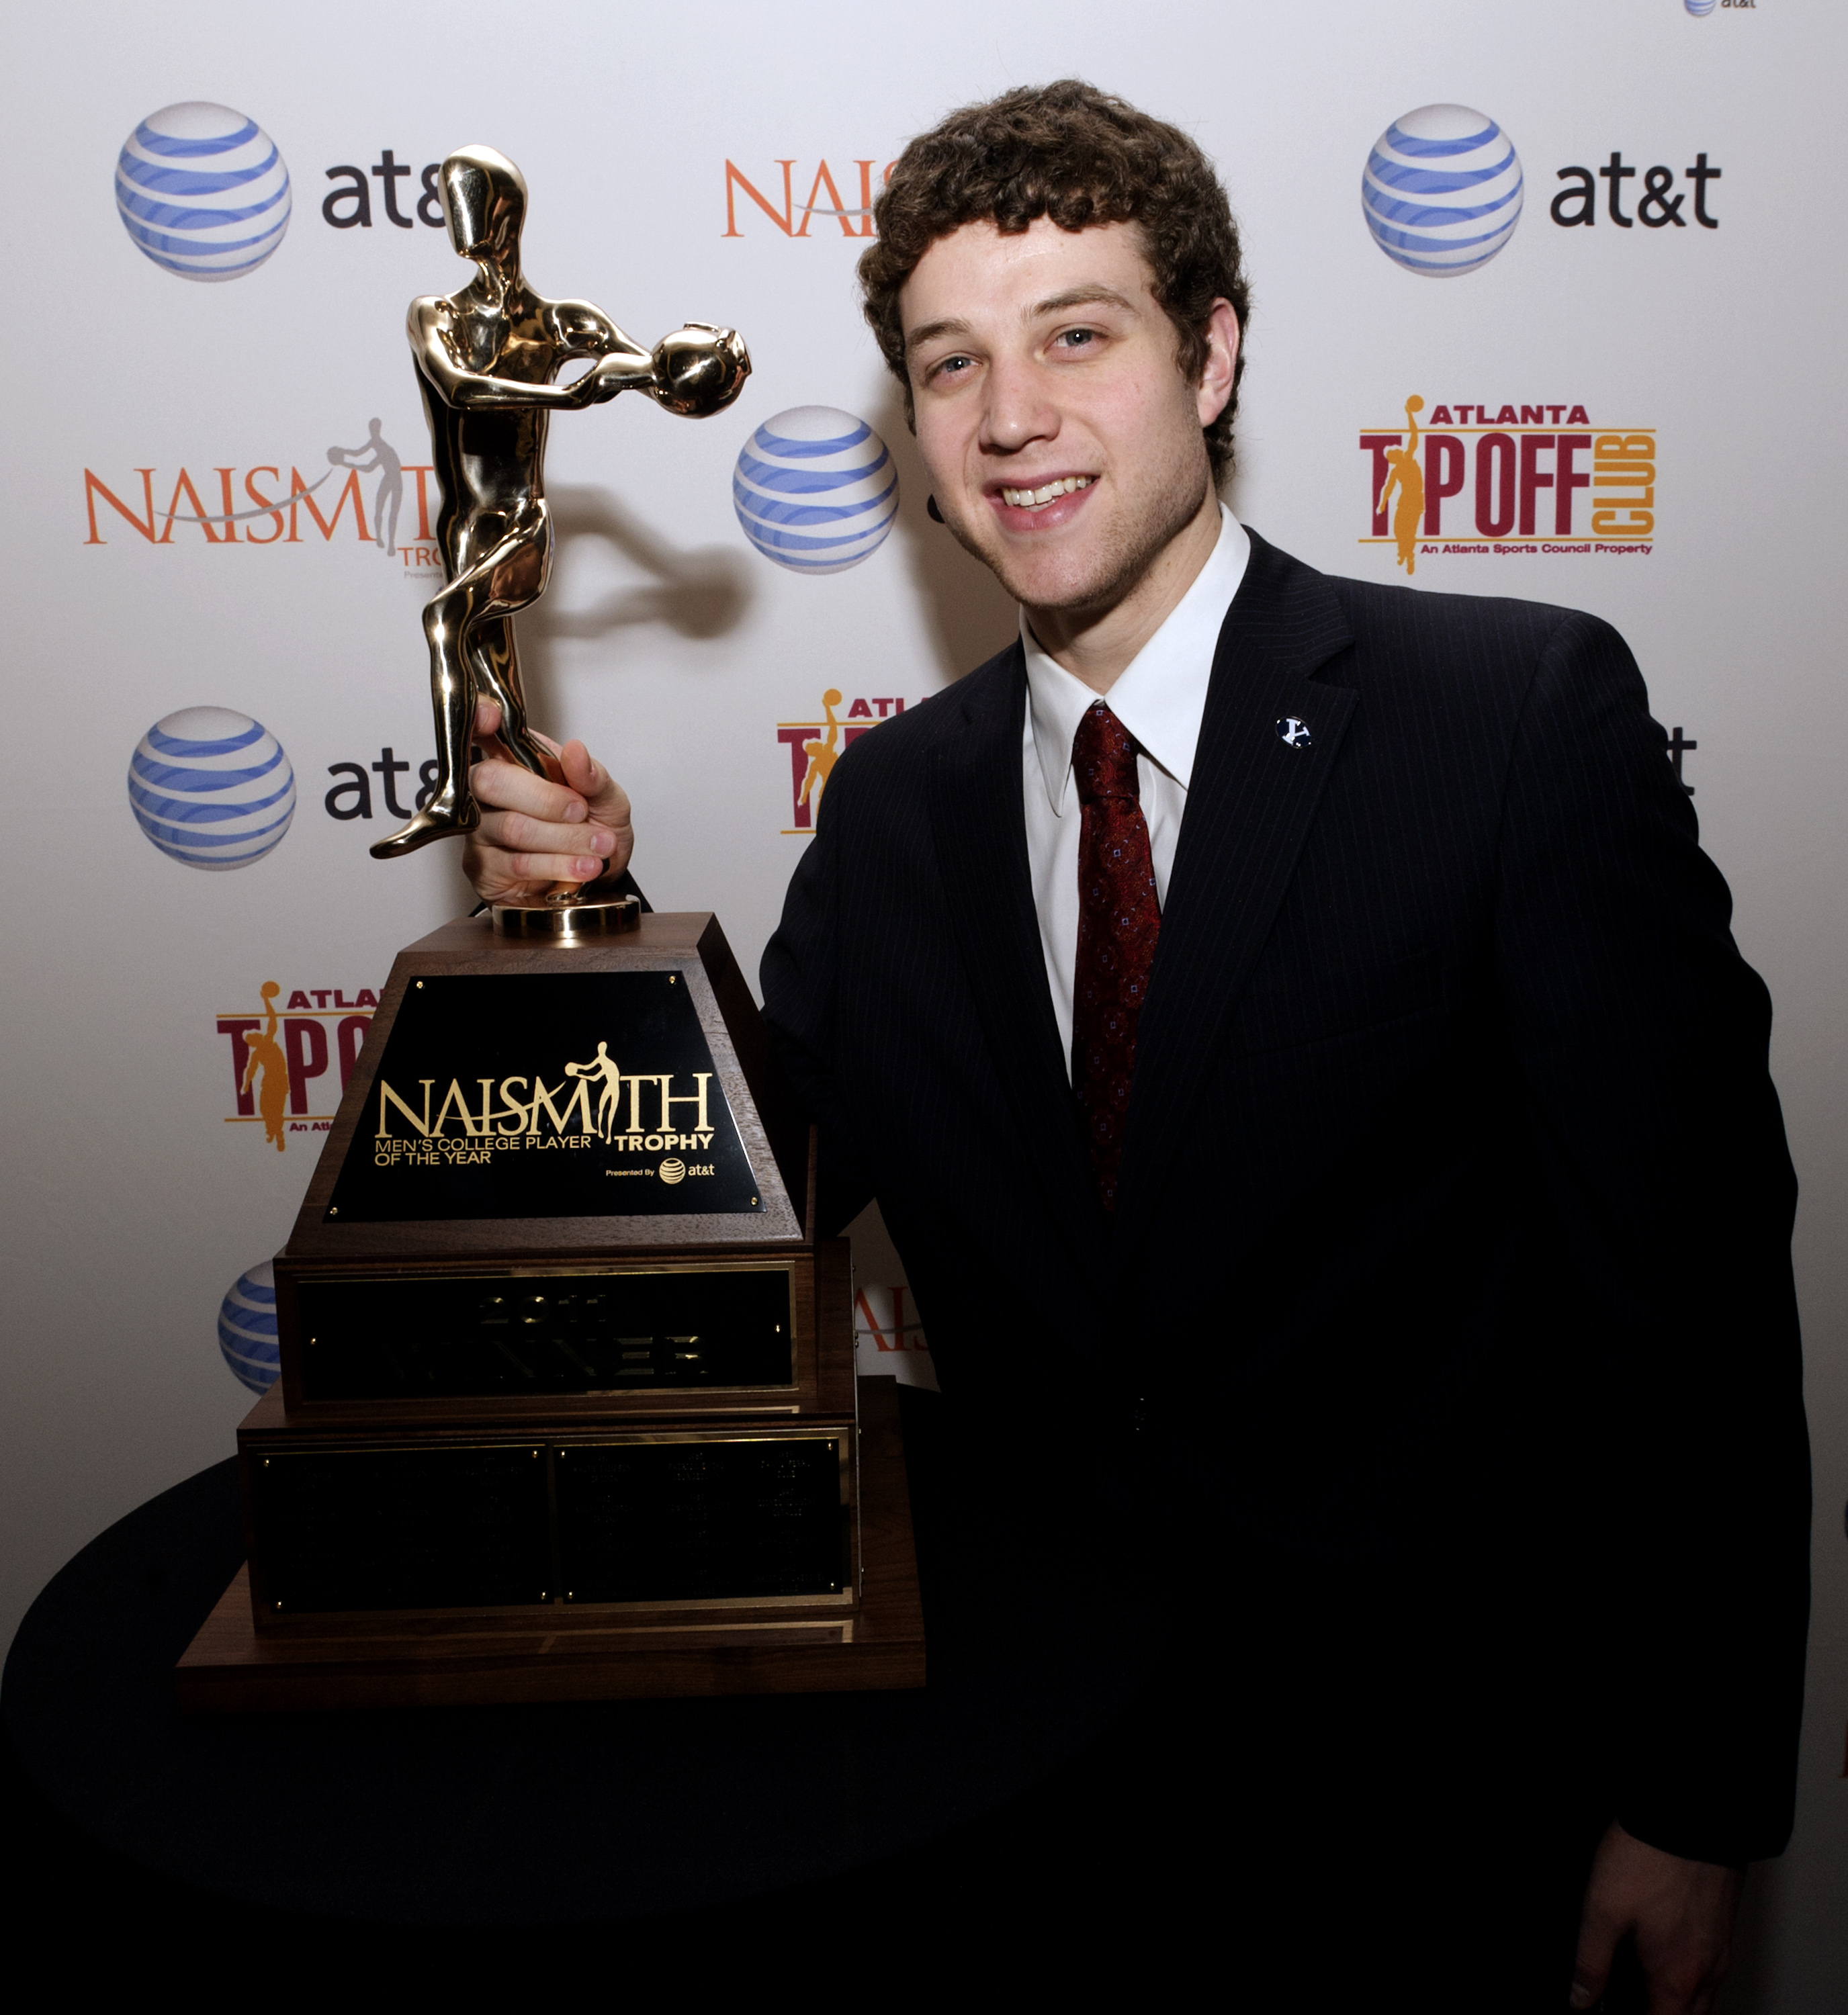 HOUSTON - APRIL 03:  Jimmer Fredette of BYU received the 2011 Naismith Trophy Presented by AT&T at the NABC Guardians of the Game Awards Program on April 3, 2011 in Houston, Texas.  (Photo by Bob Levey/Getty Images)